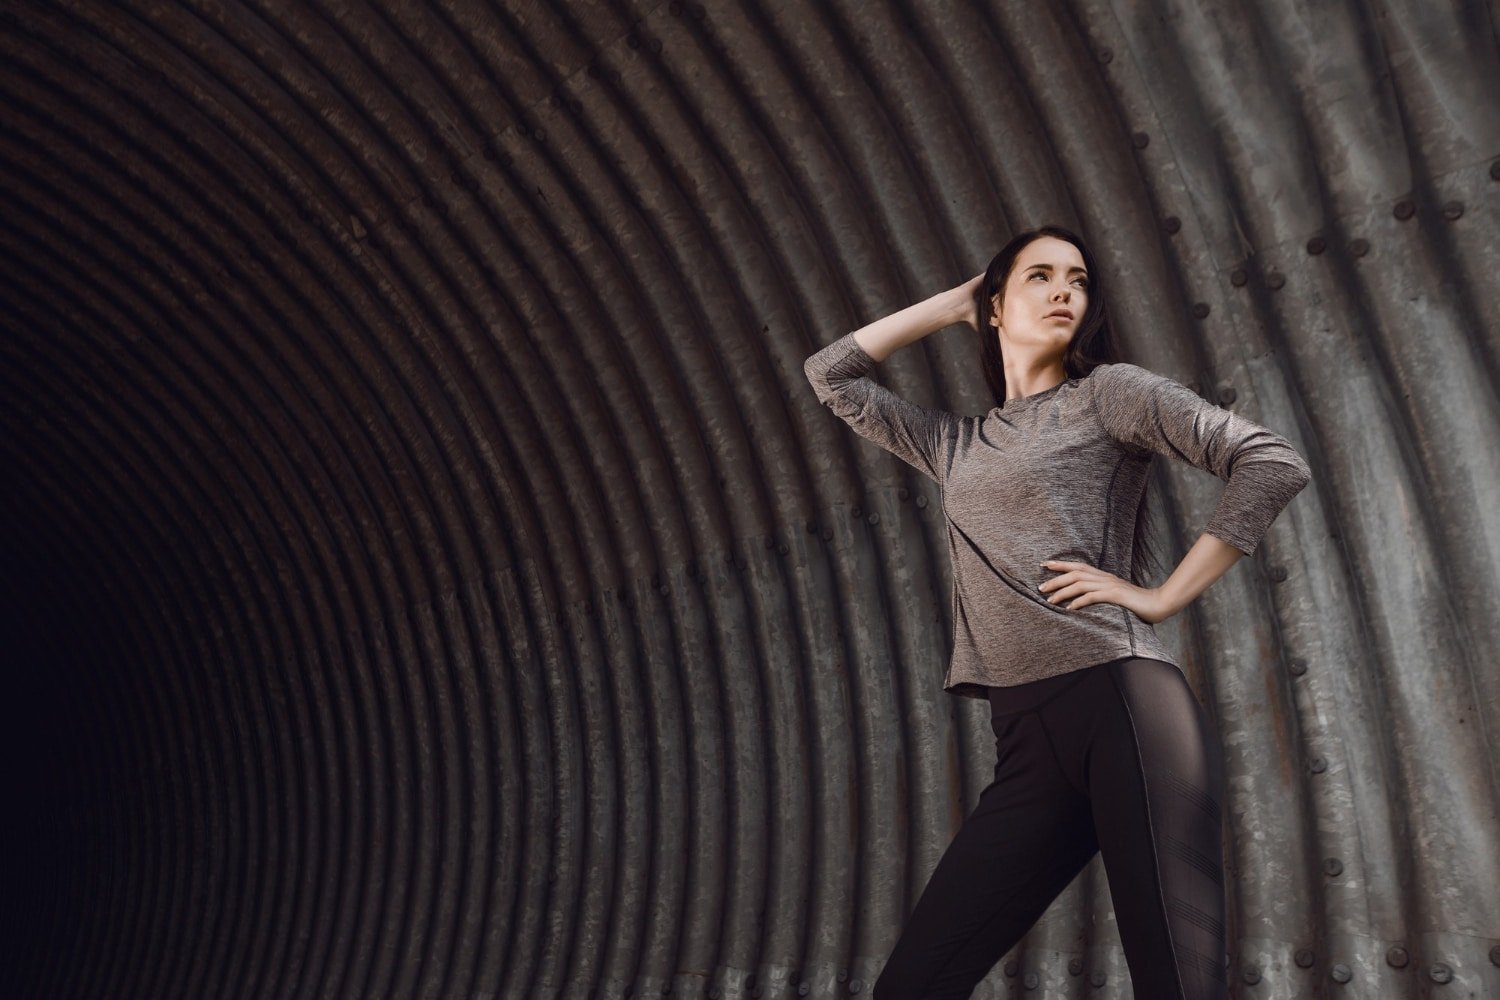 Stay Active And Stylish With Carbon38’s Designer Activewear